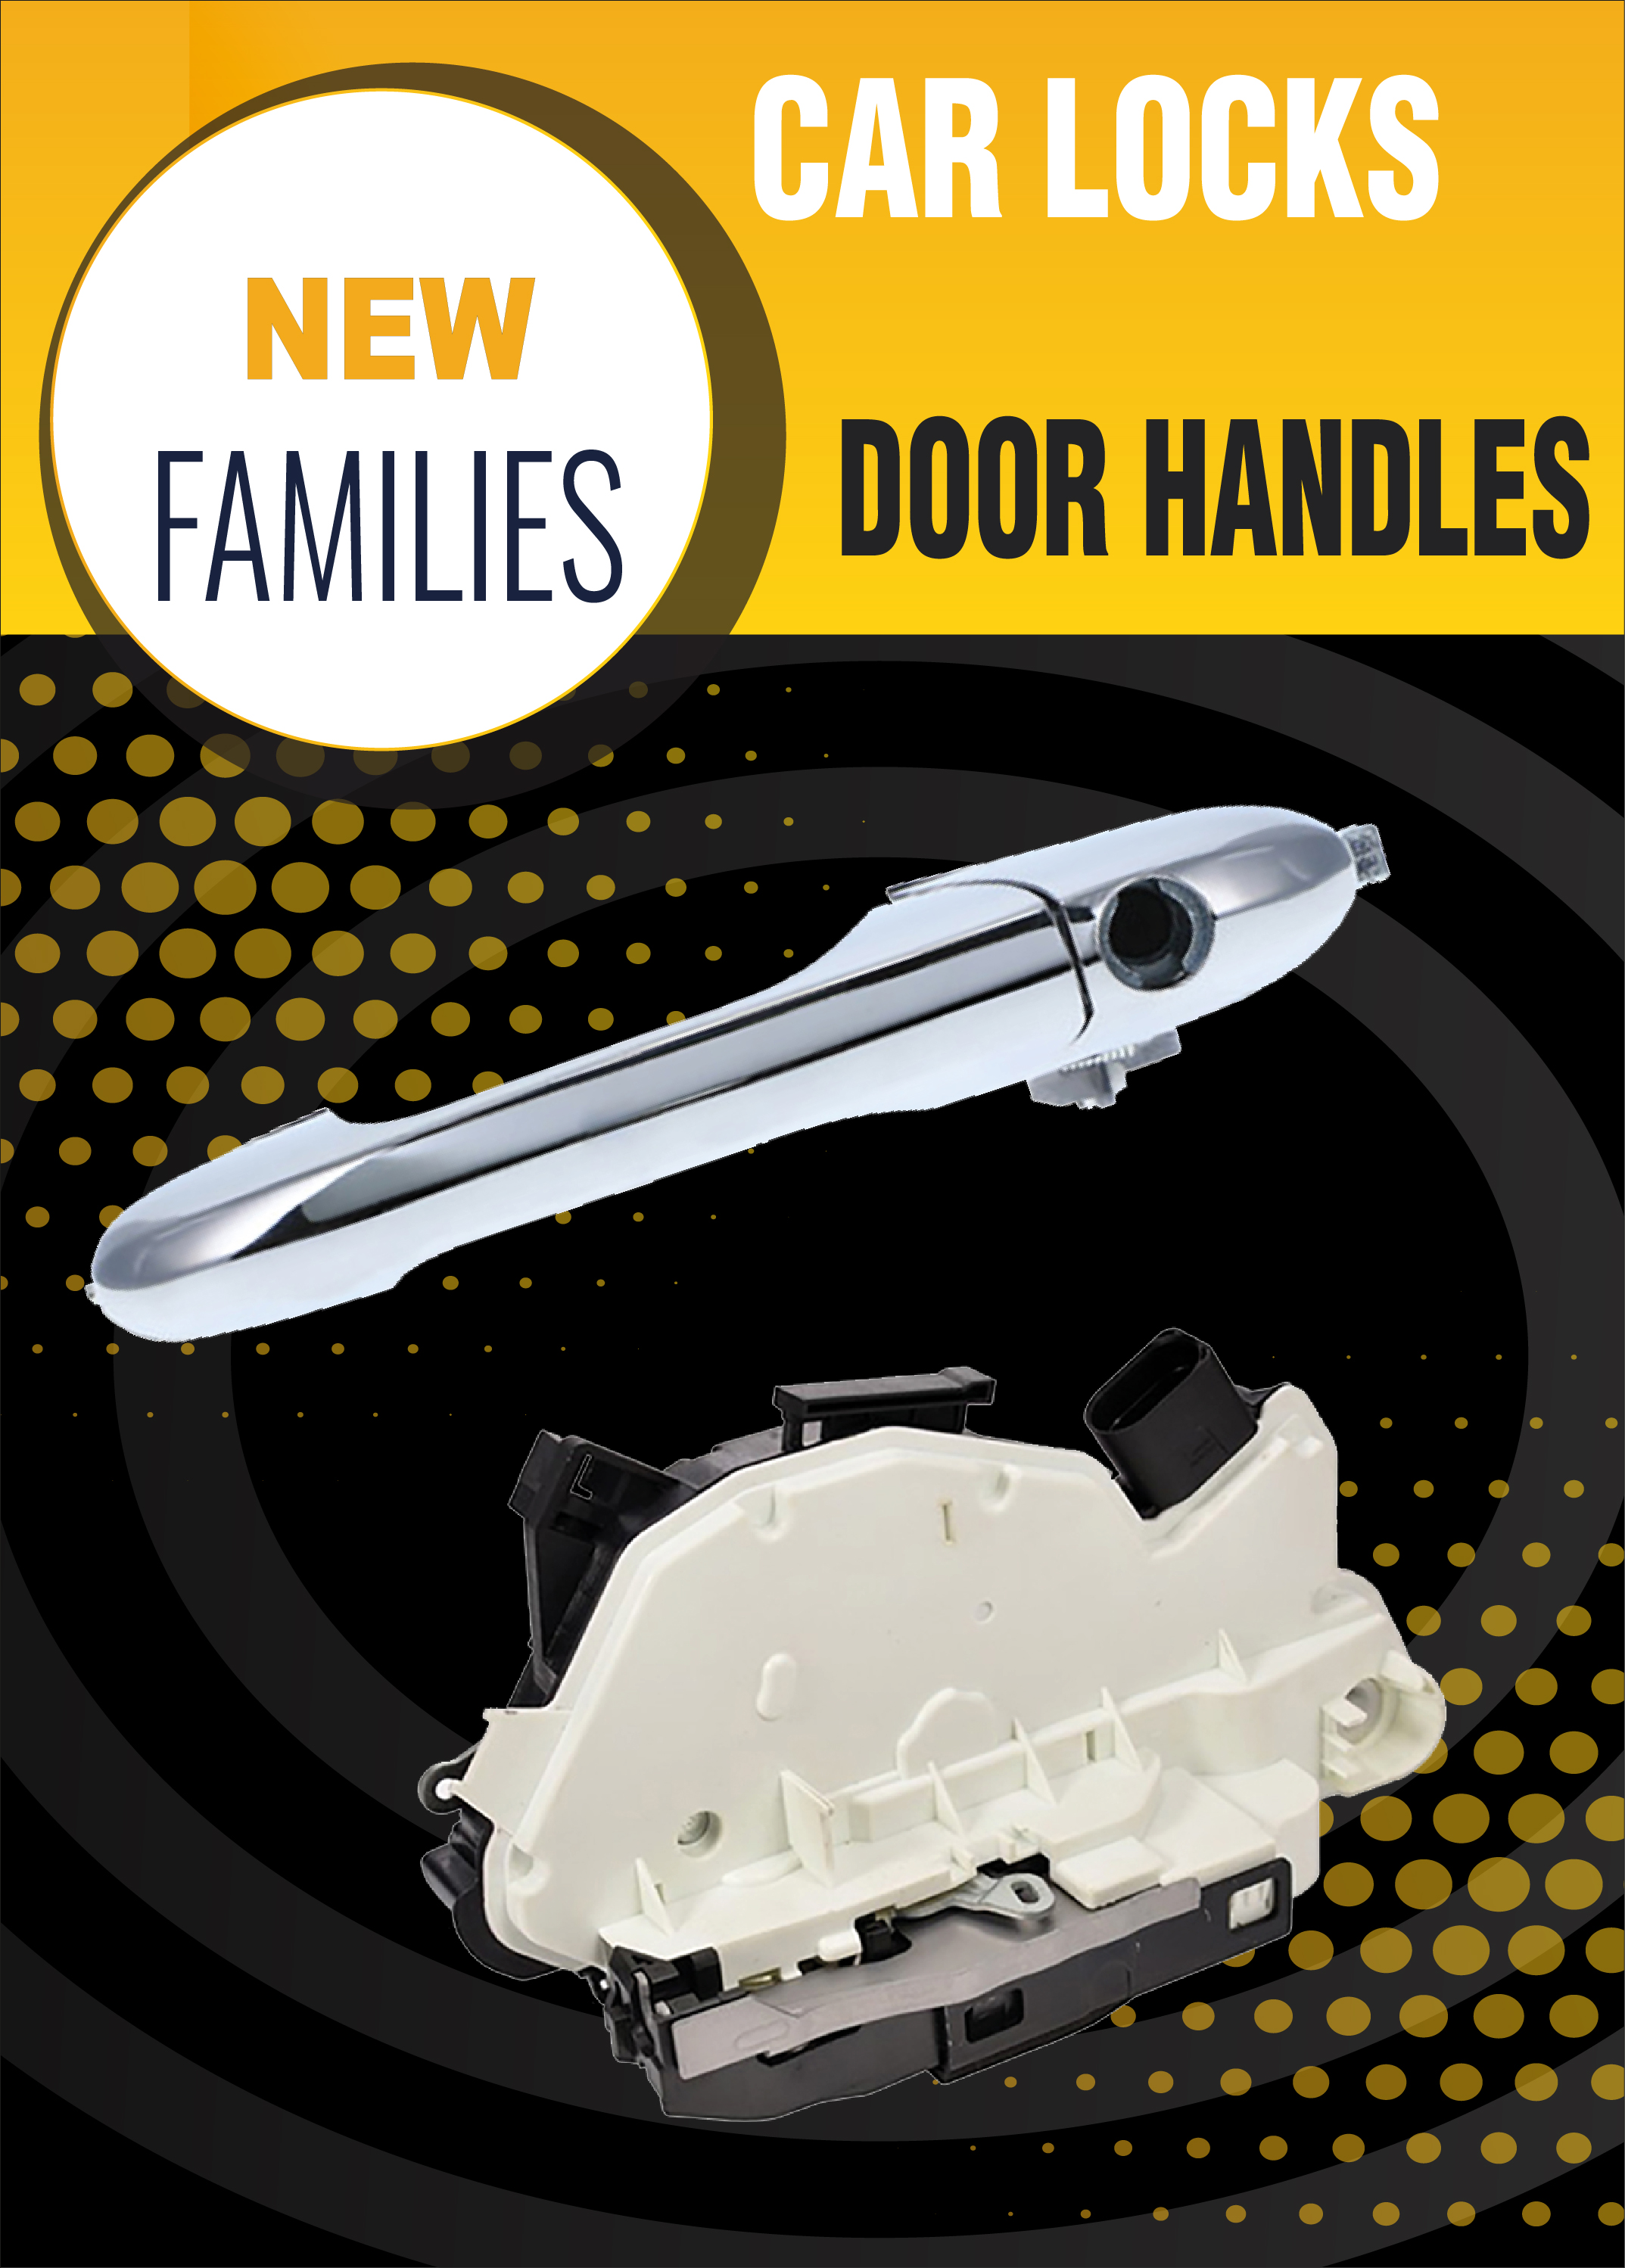 NEW FAMILIES: Locks and Handles